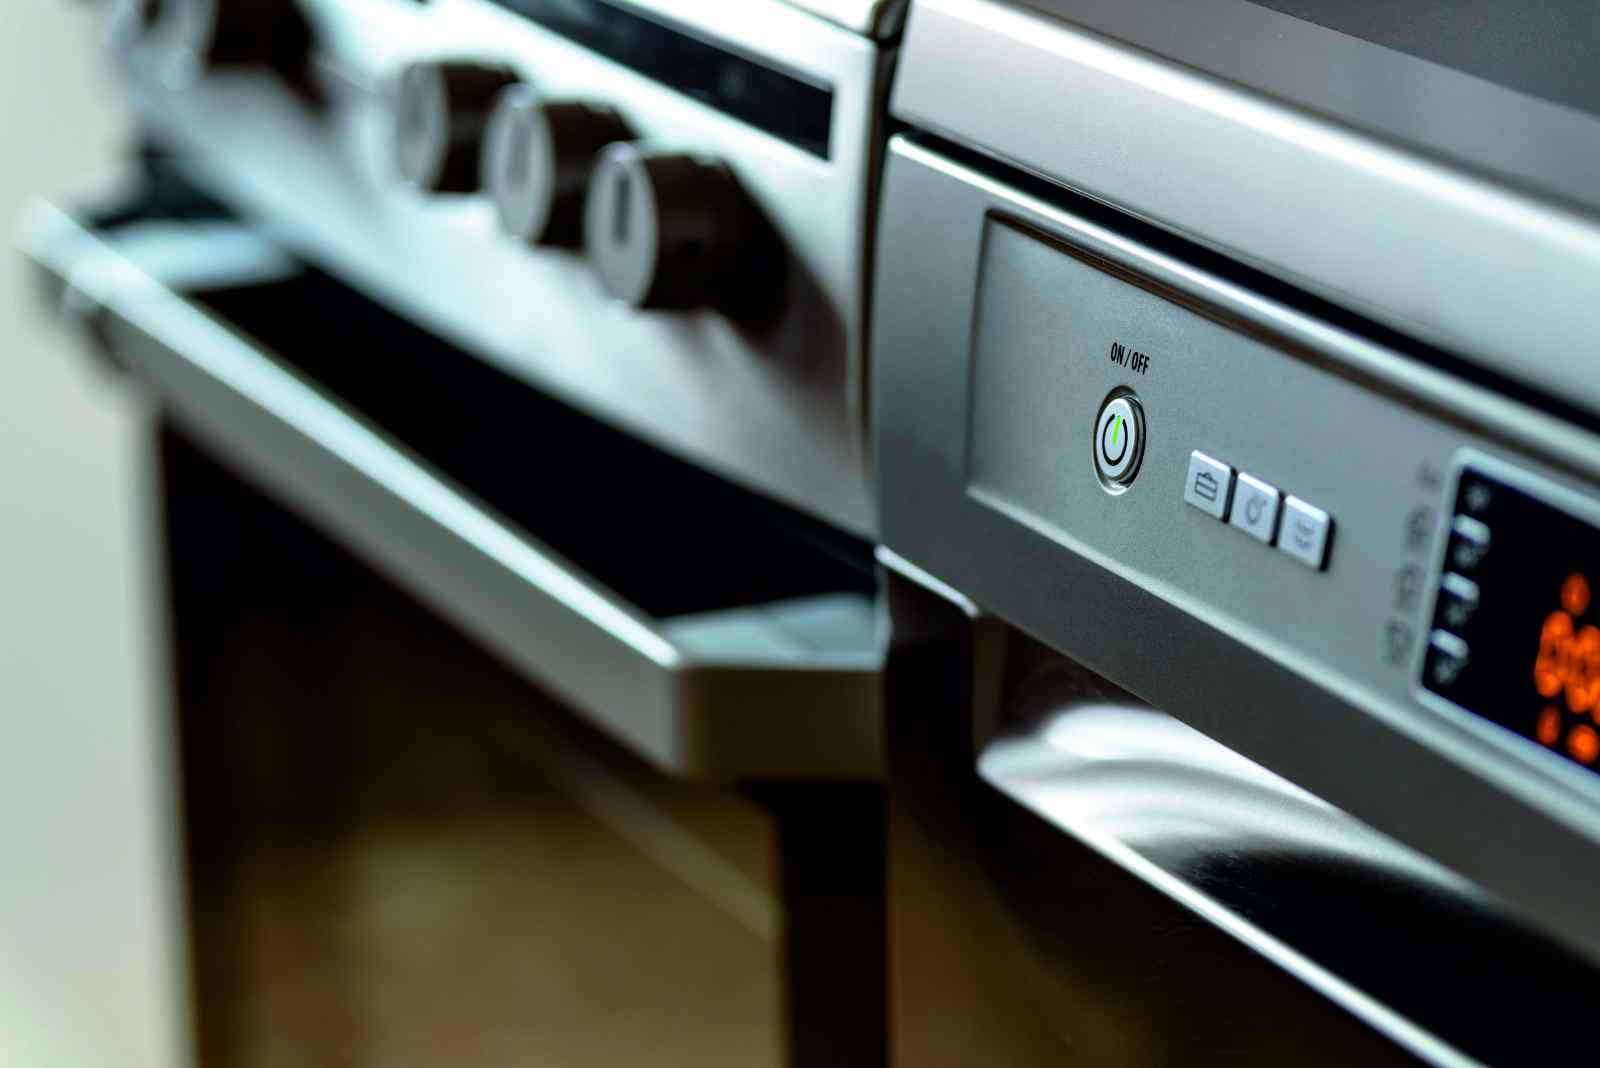 Professional Oven cleaning London